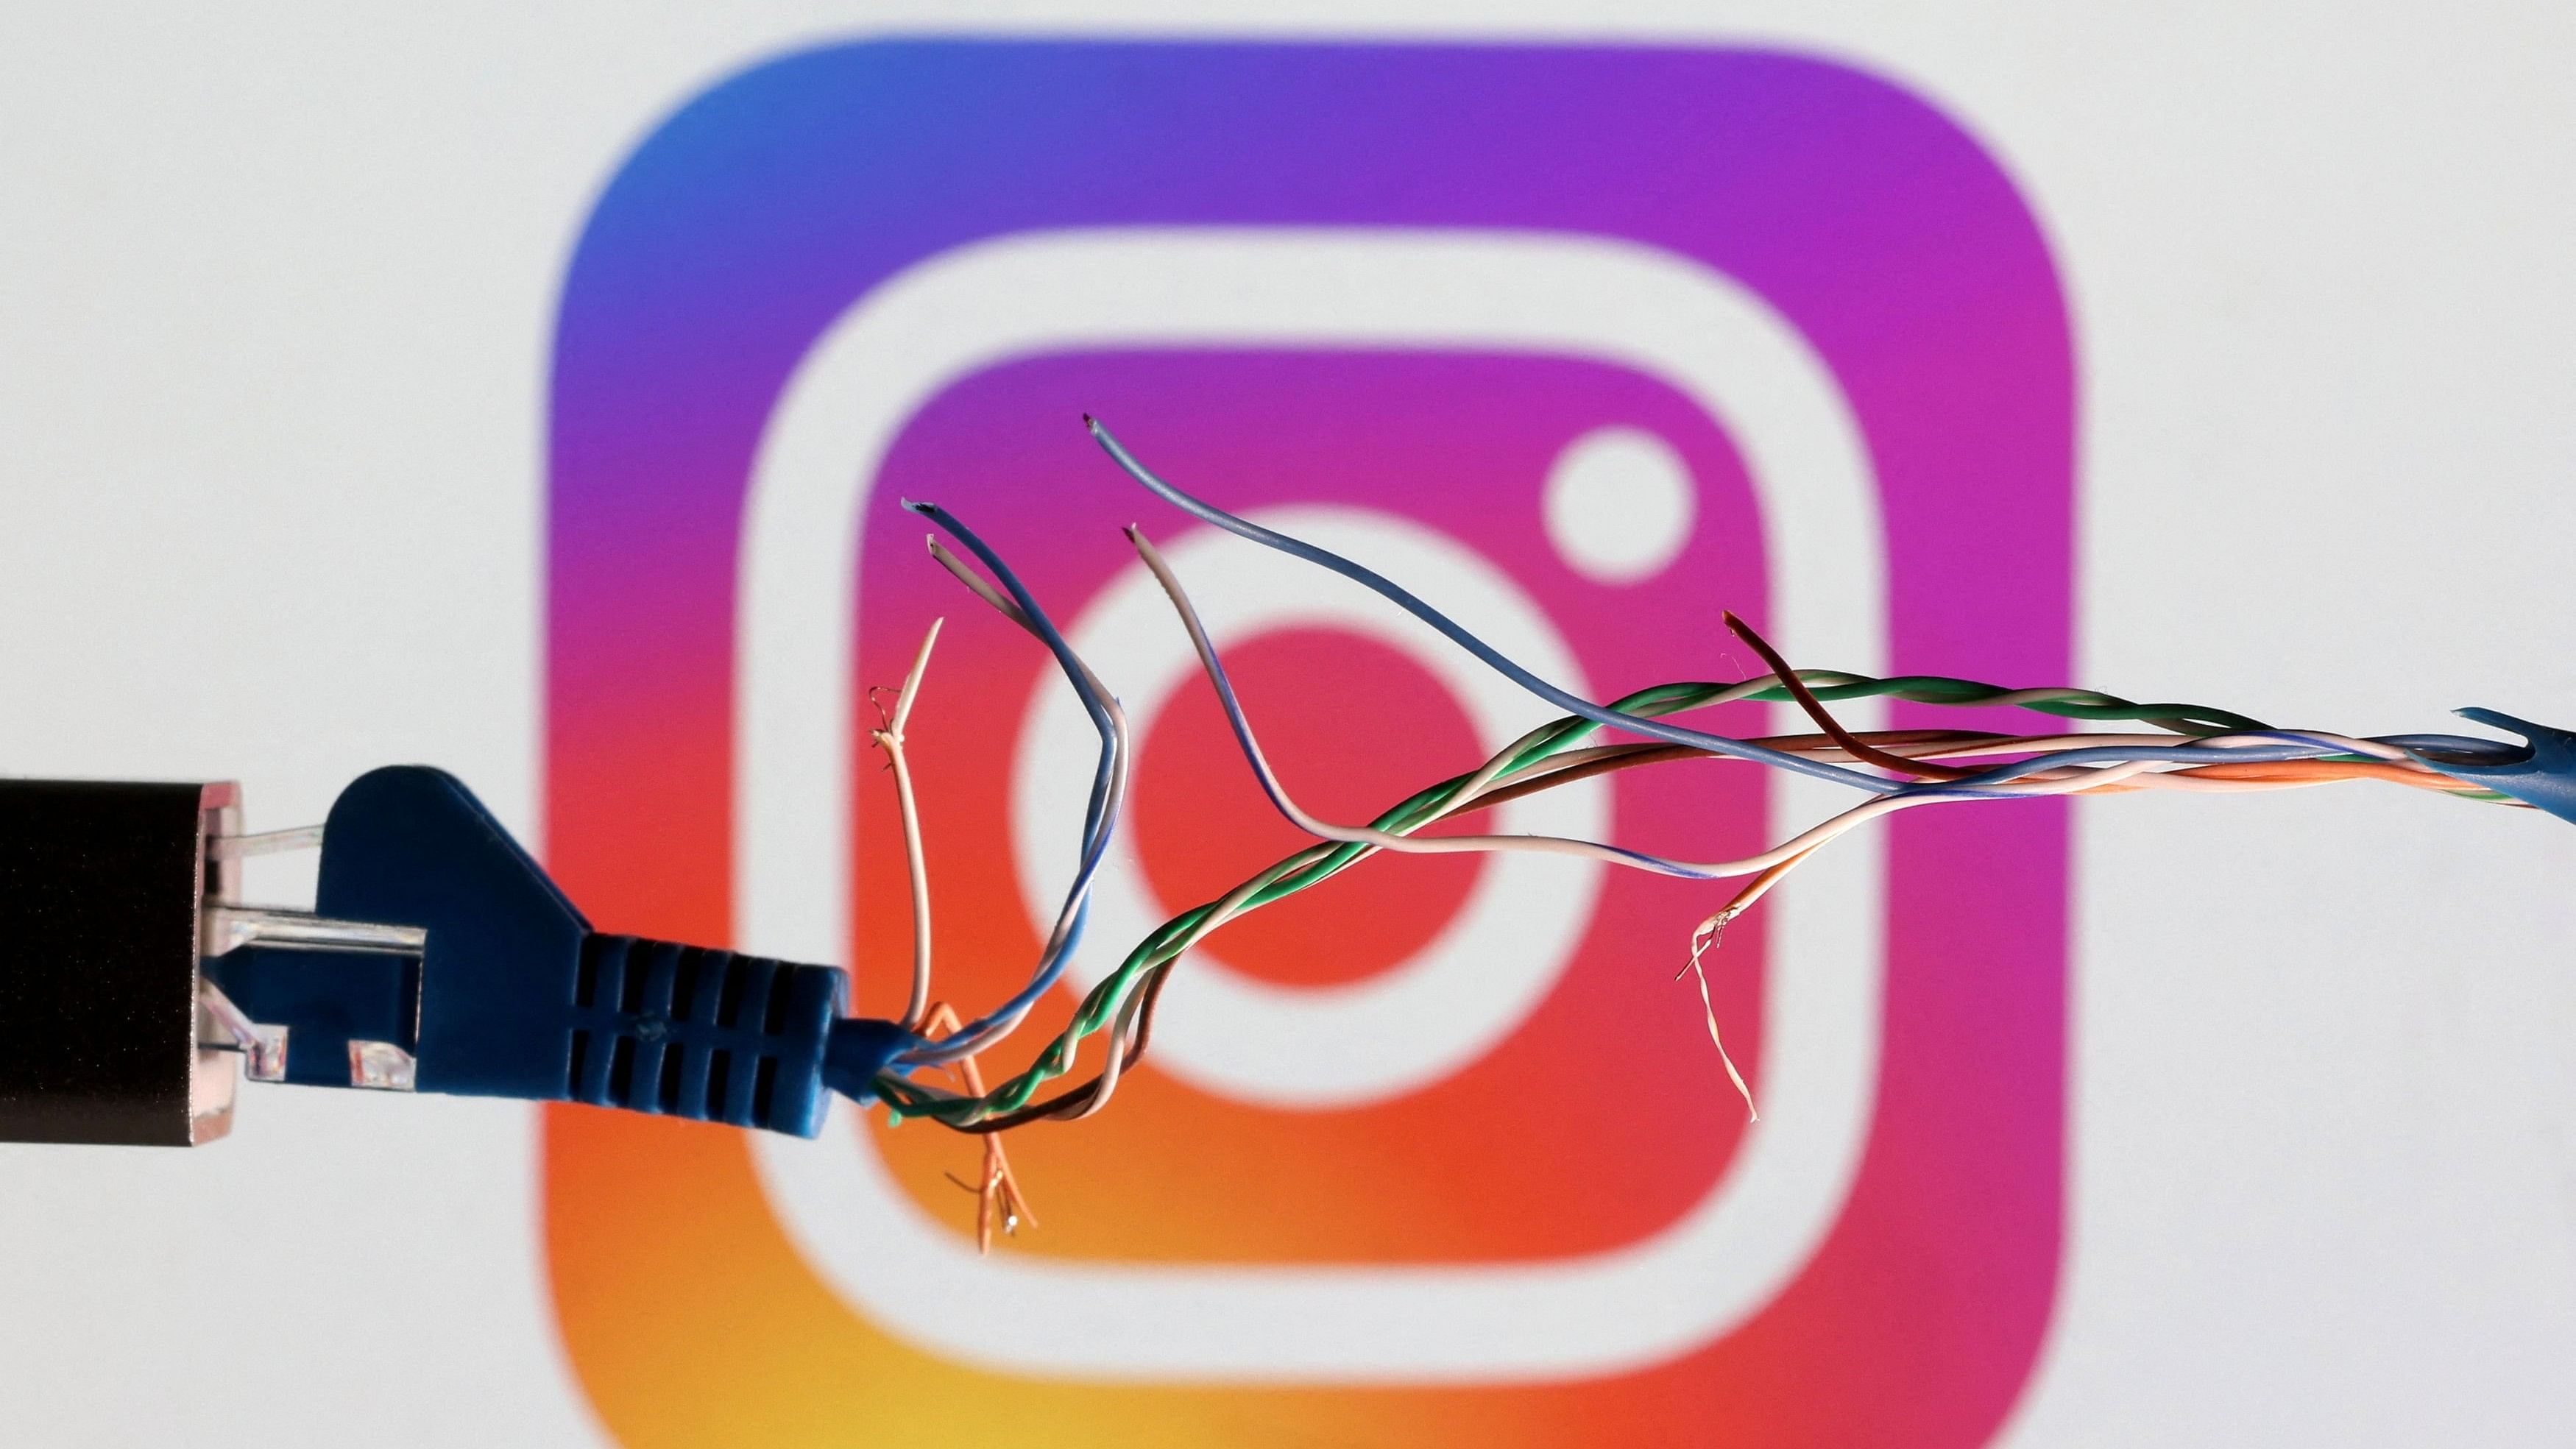 <div class="paragraphs"><p>FILE PHOTO: Broken Ethernet cable is seen in front of Instagram logo in this illustration.</p></div>